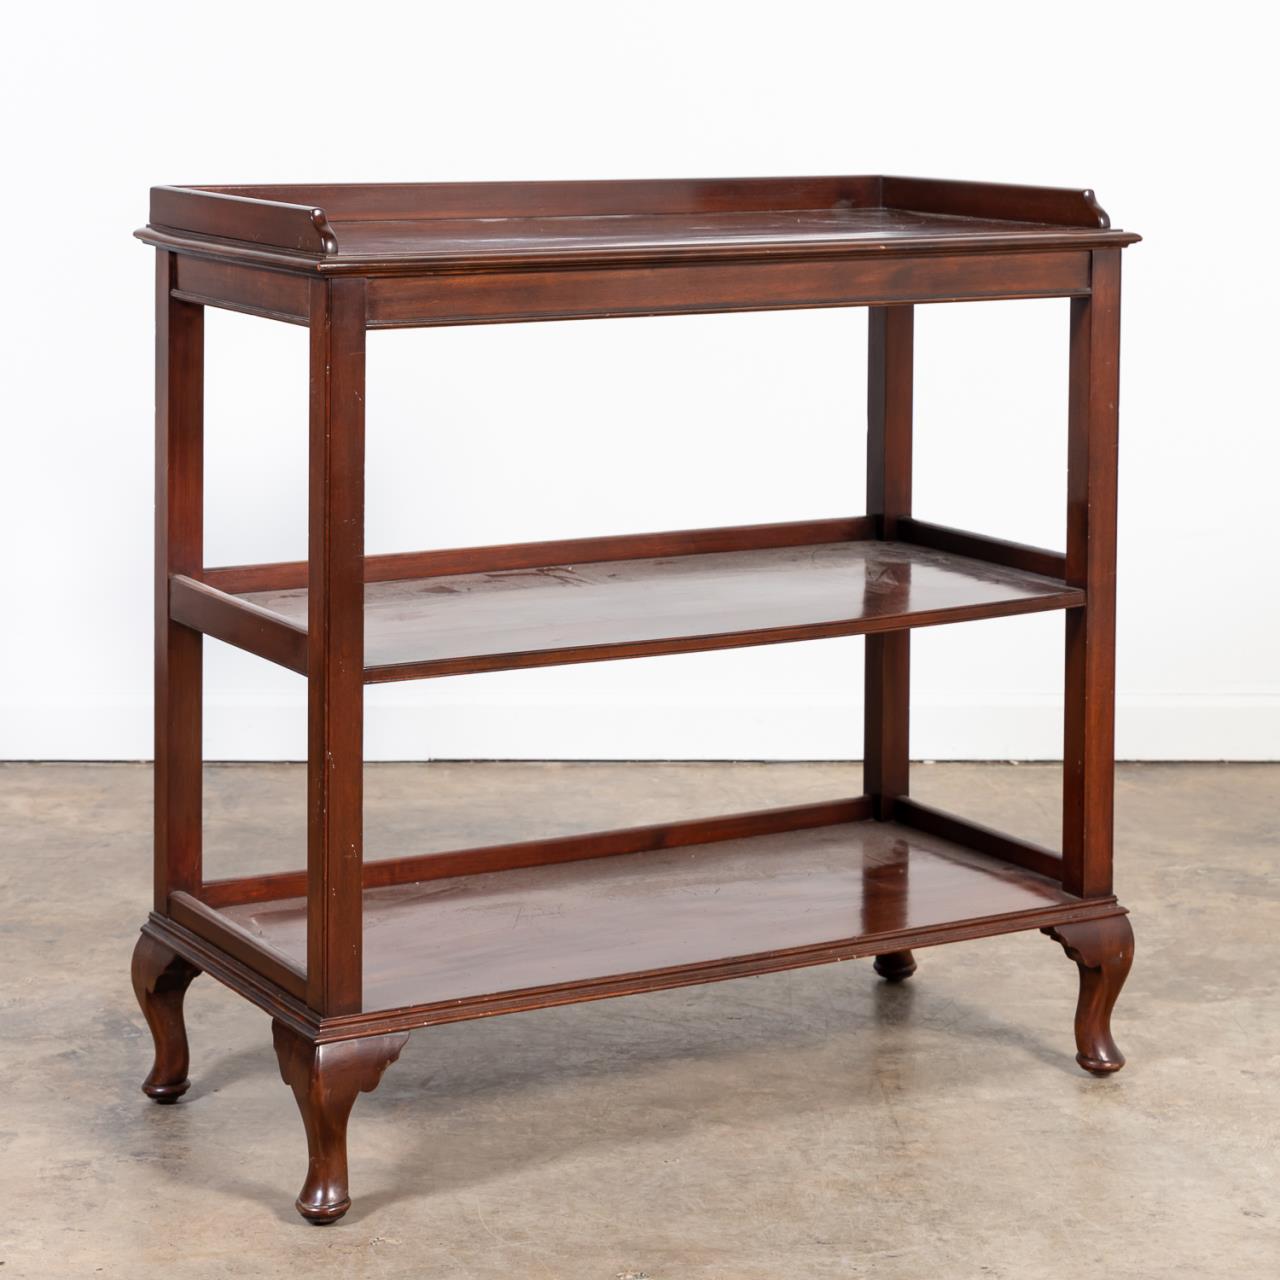 QUEEN ANNE-STYLE MAHOGANY THREE-TIER